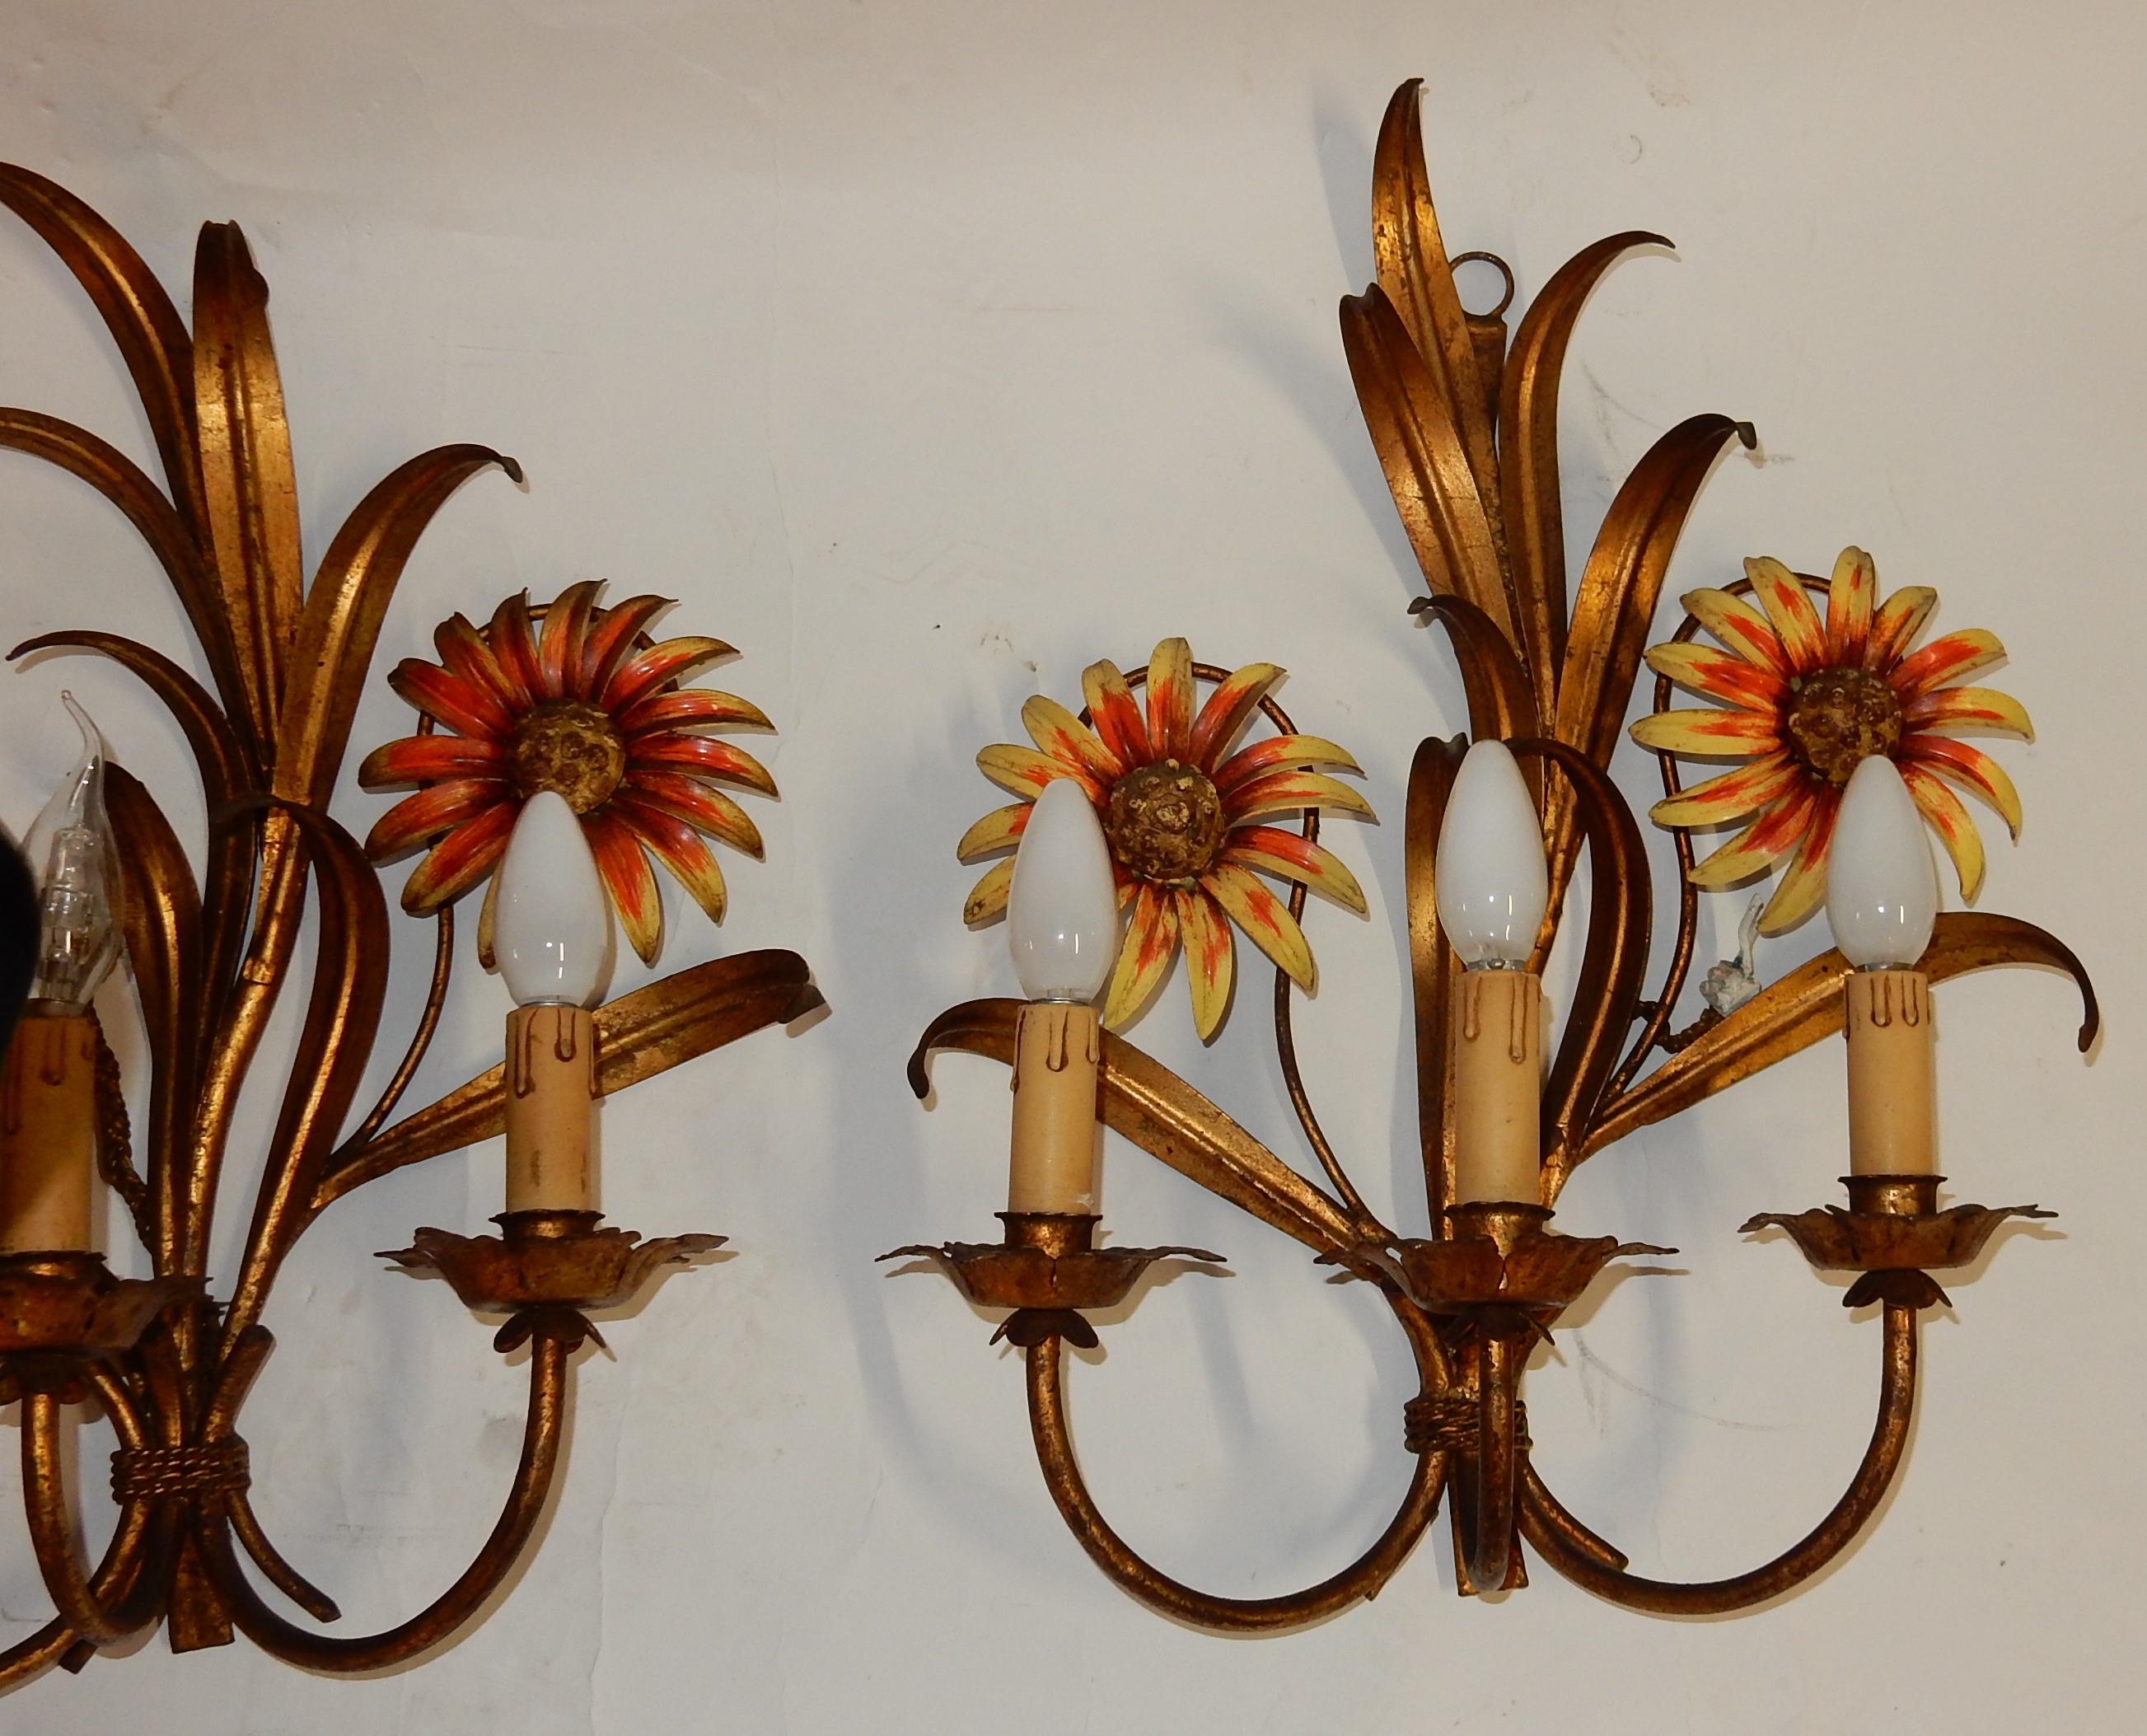 1970 Pair of Painted Metal Sconces with Sunflower Decor 3 Arms of Light For Sale 1